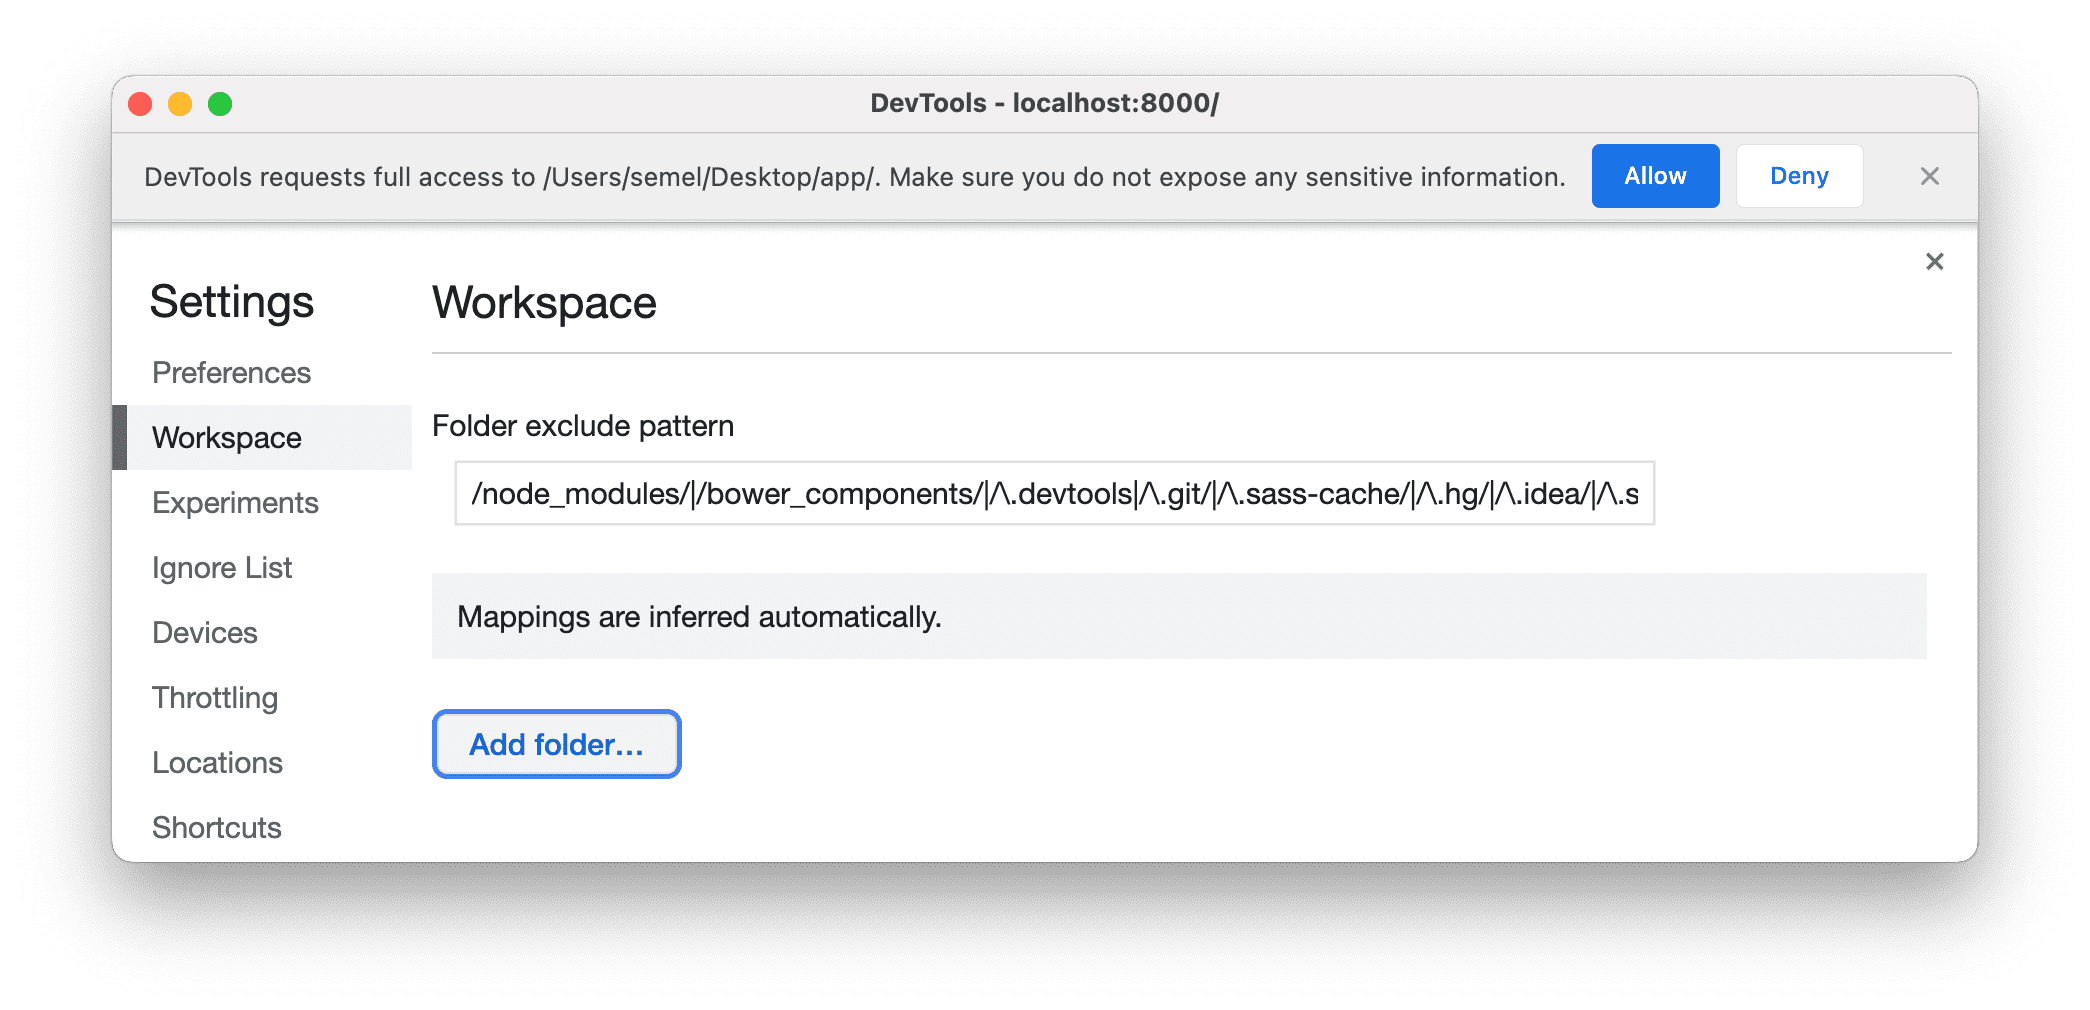 The prompt requesting full access to sources for DevTools.